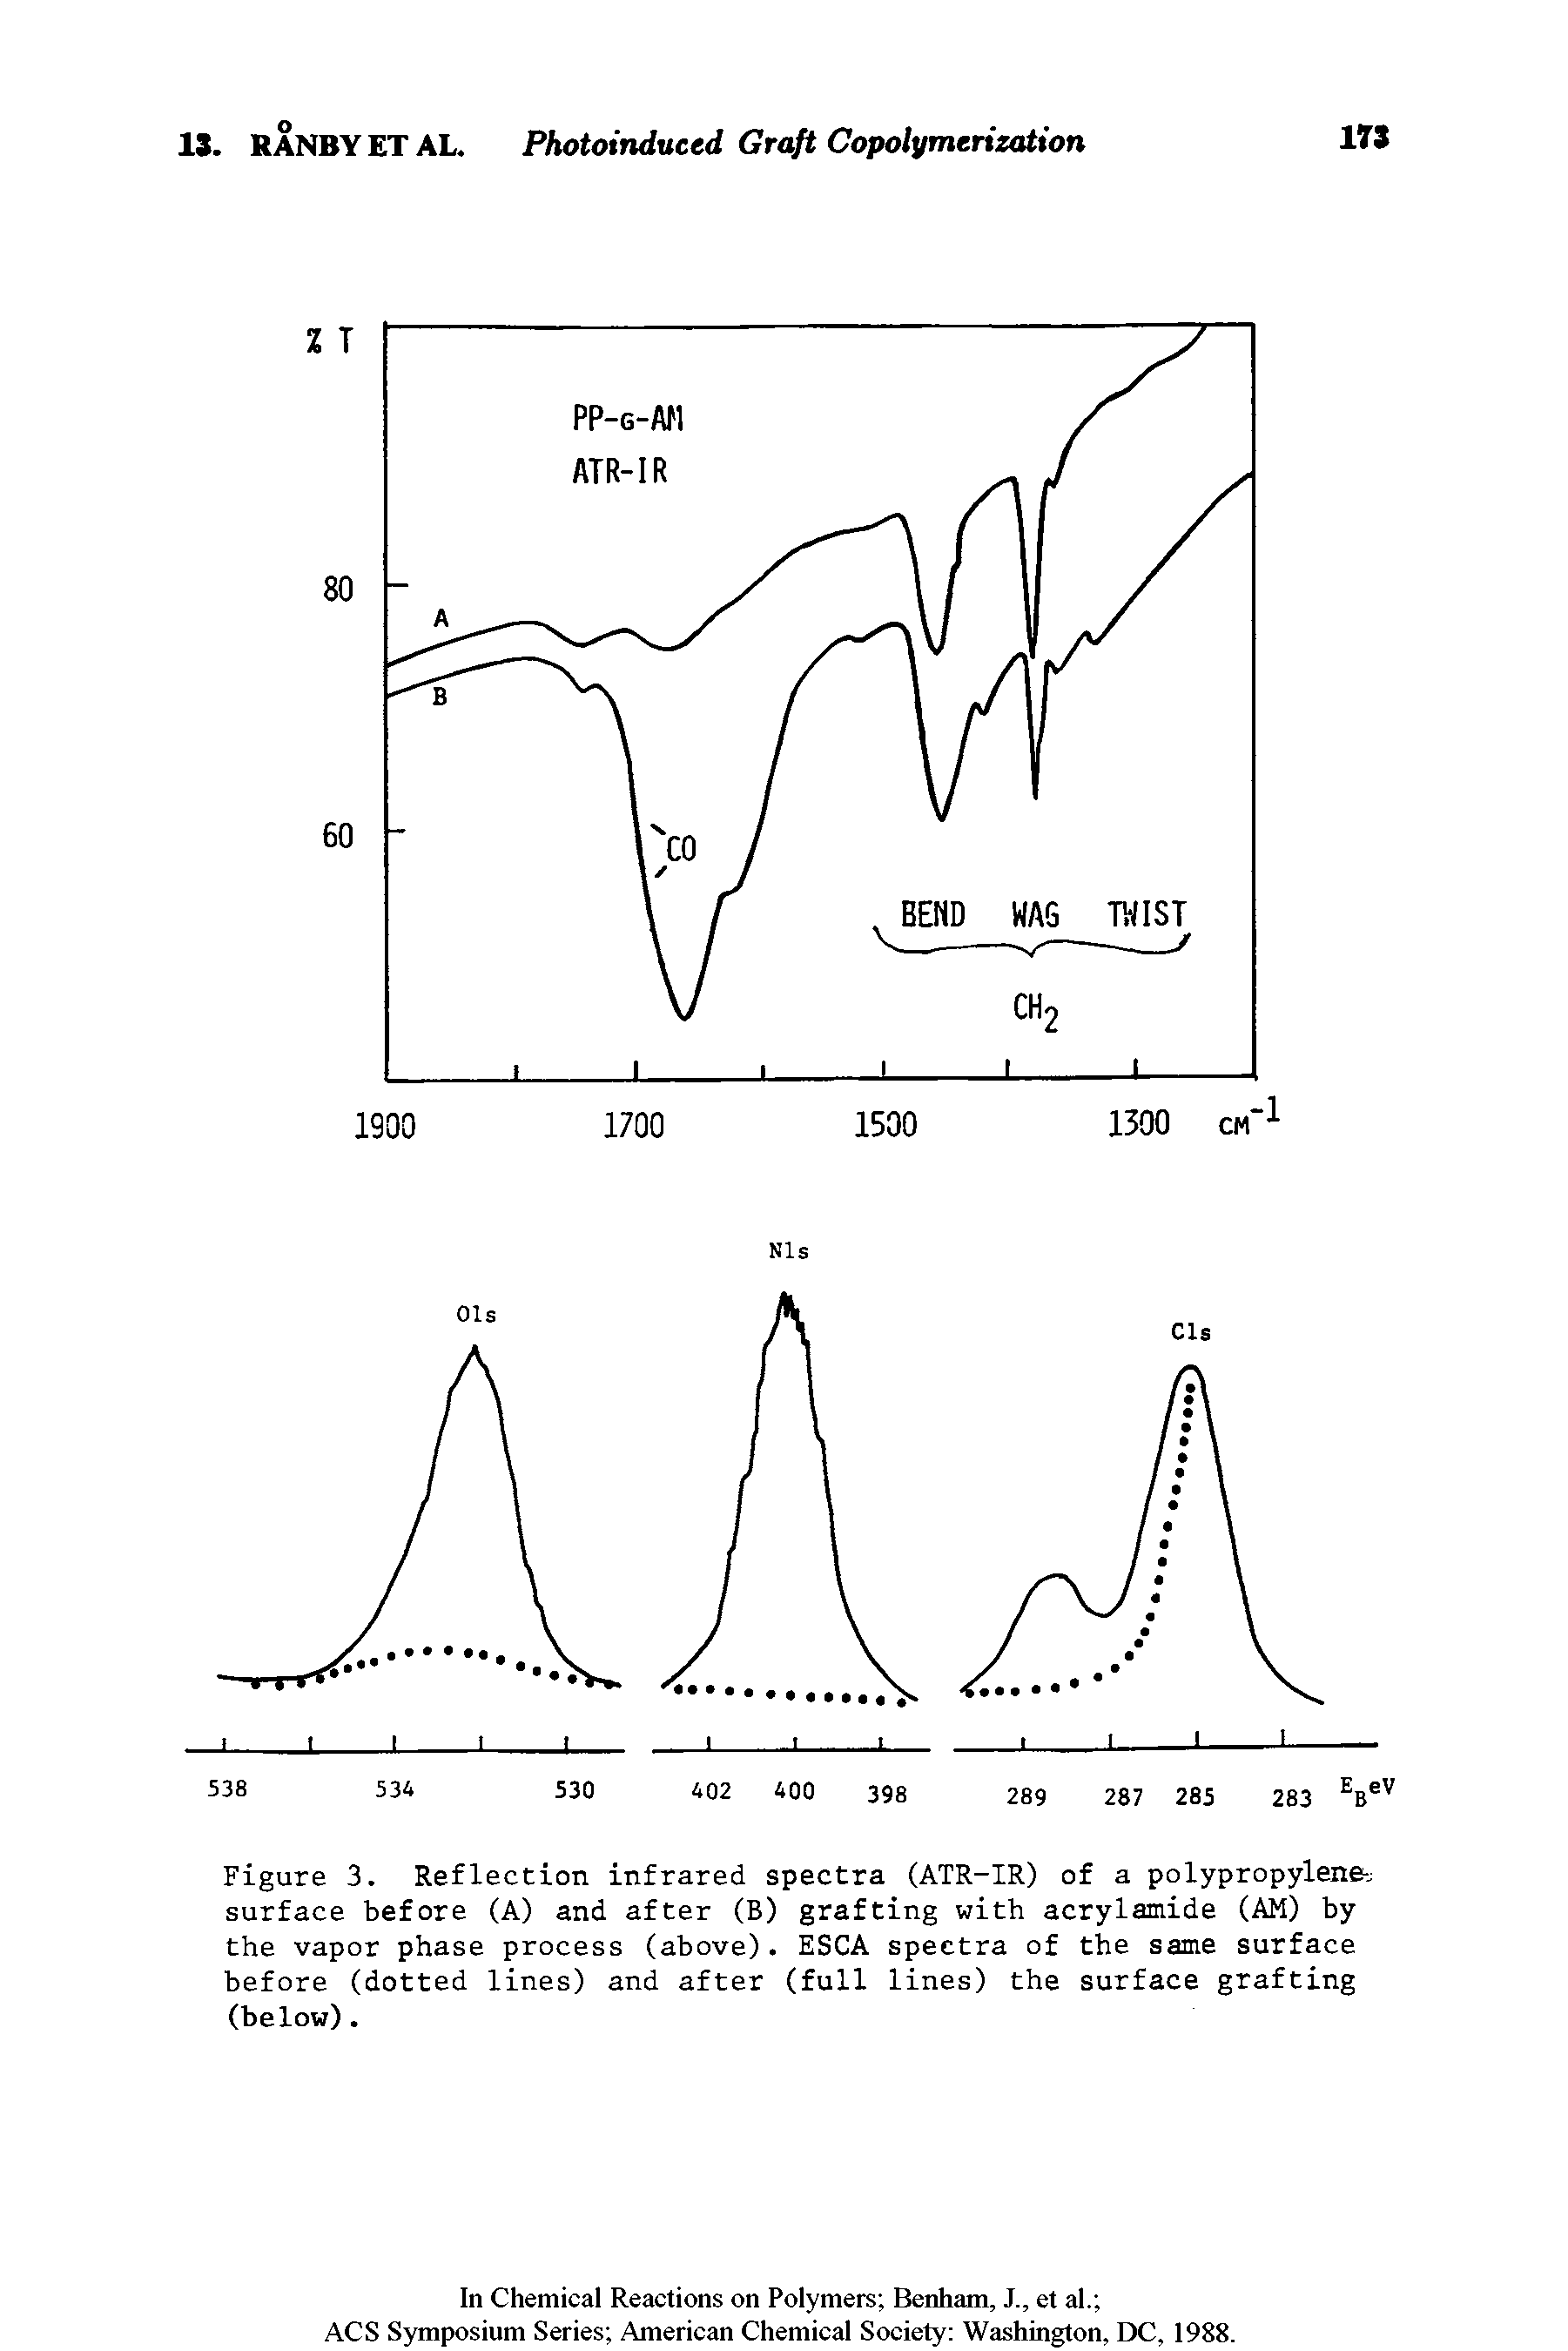 Figure 3. Reflection infrared spectra (ATR-IR) of a polypropylene-j surface before (A) and after (B) grafting with acrylamide (AM) by the vapor phase process (above). ESCA spectra of the same surface before (dotted lines) and after (full lines) the surface grafting (below).